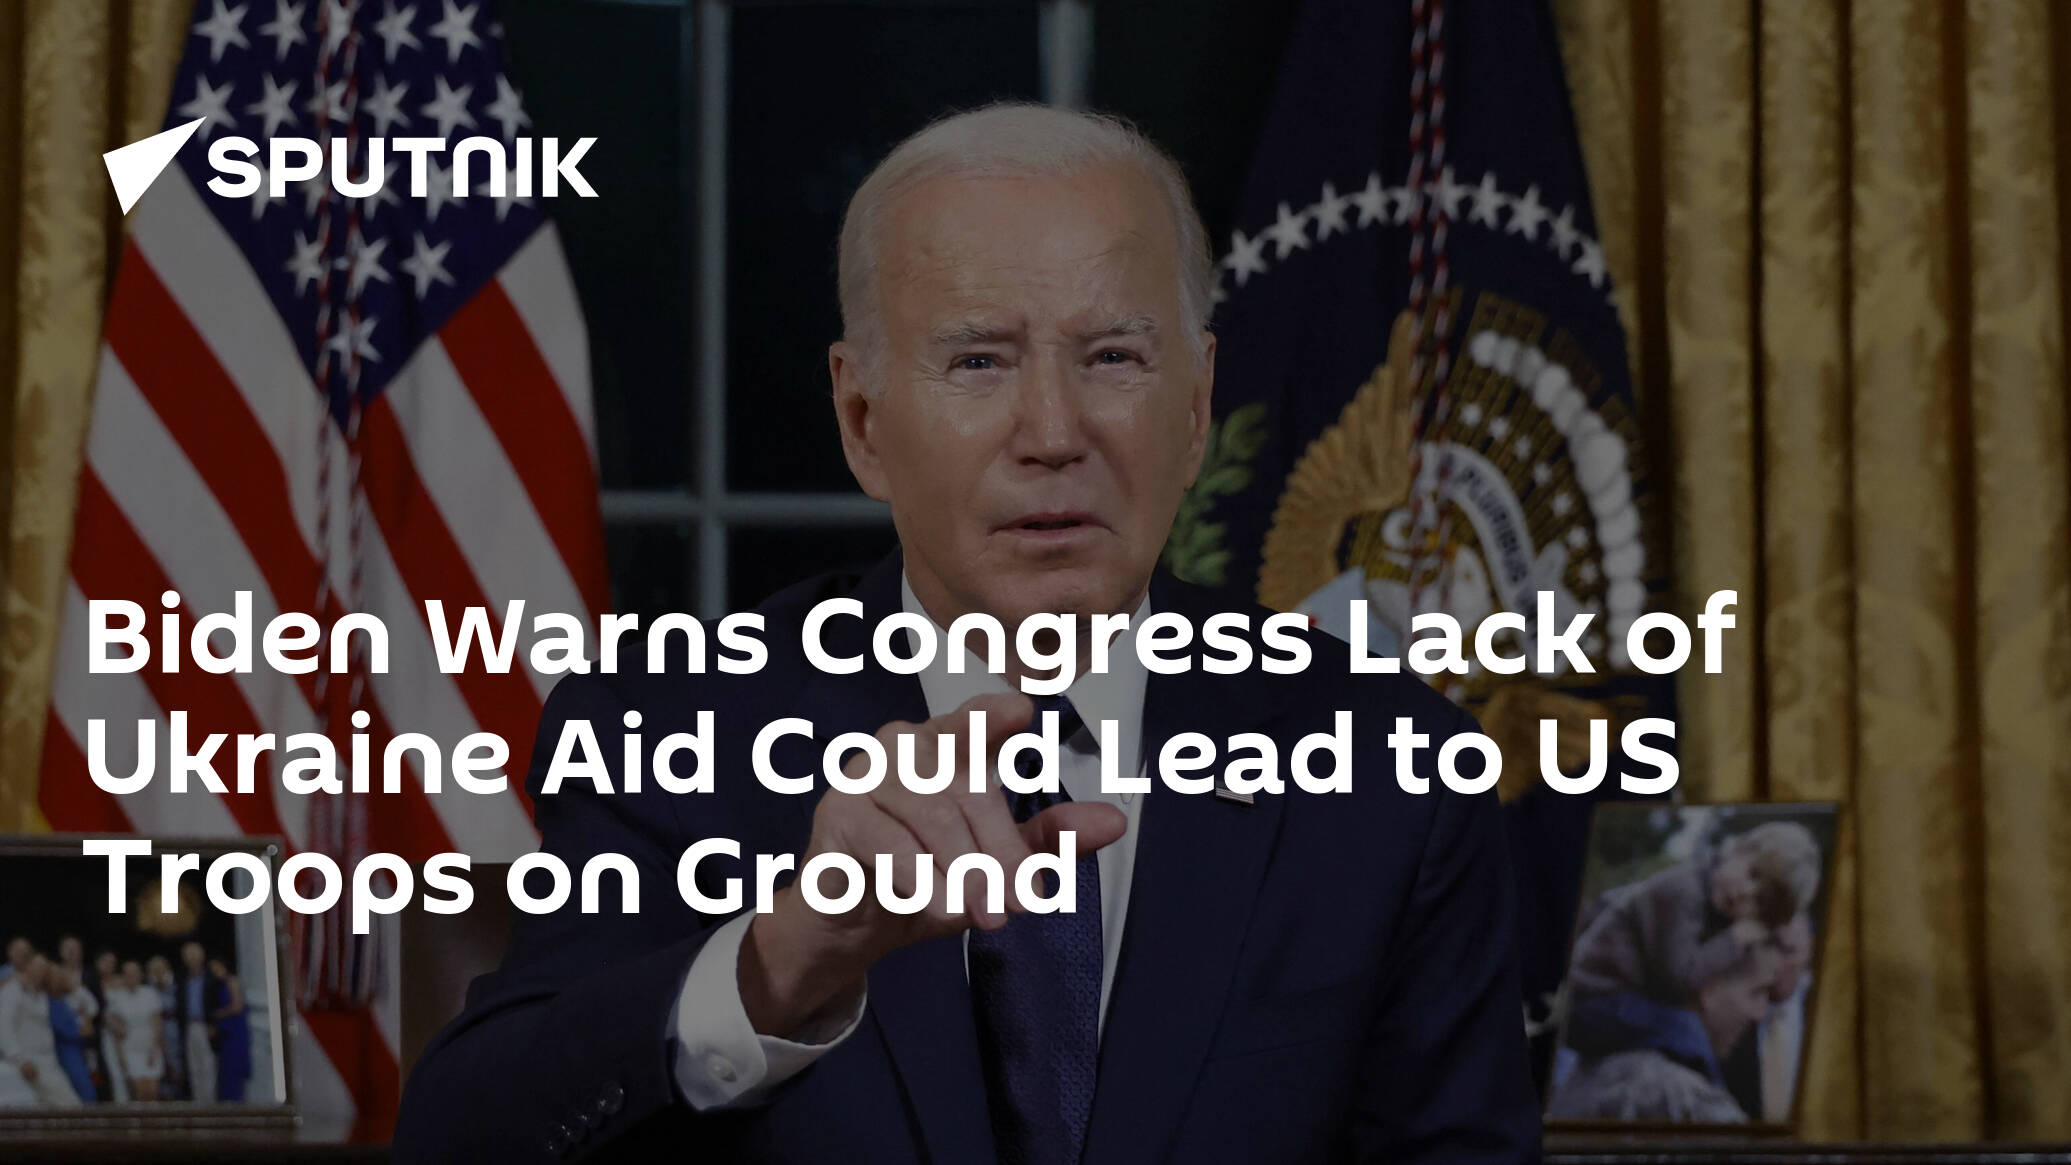 Biden Warns Congress Lack of Ukraine Aid Could Lead to US Troops on Ground